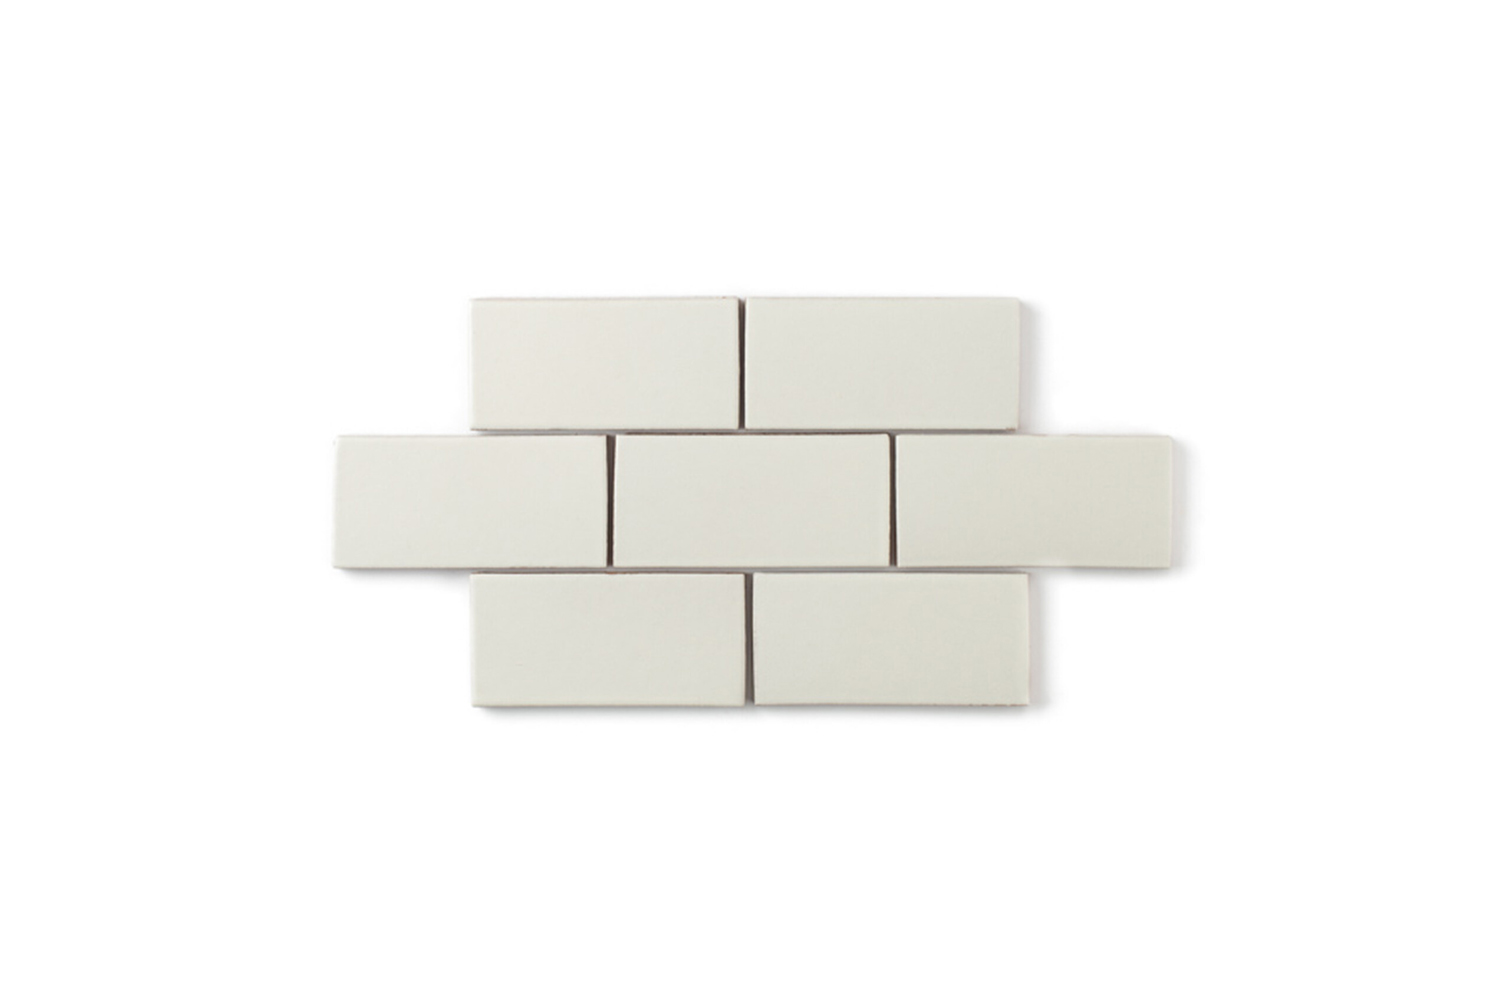 for a similar warm off white color subway tile, the fireclay halite tile comes  15